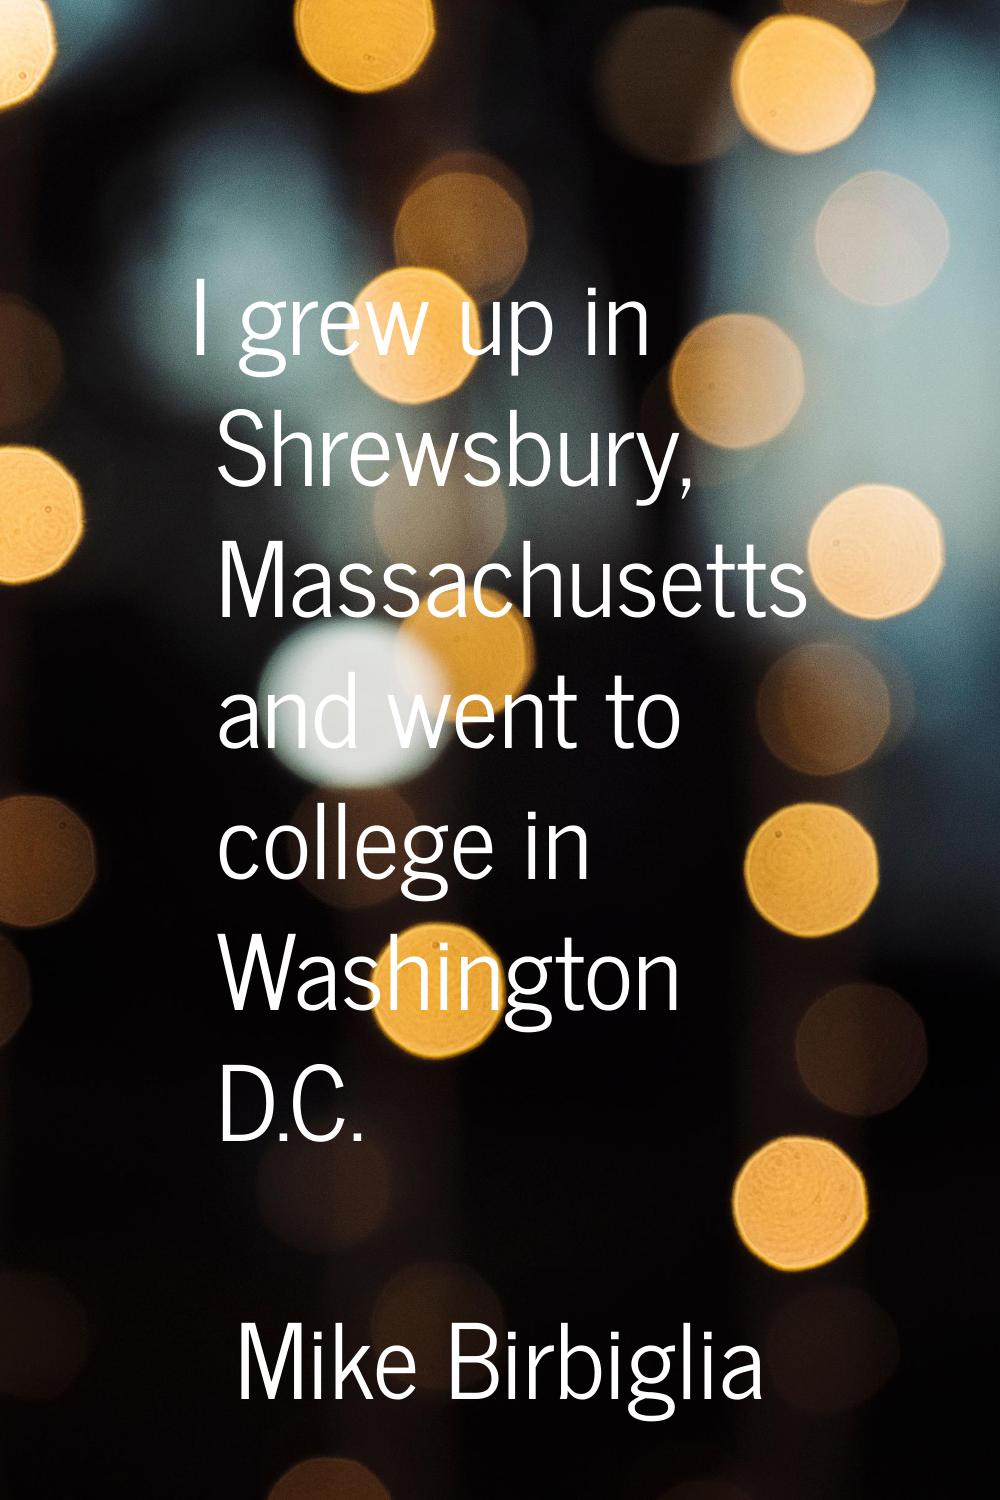 I grew up in Shrewsbury, Massachusetts and went to college in Washington D.C.